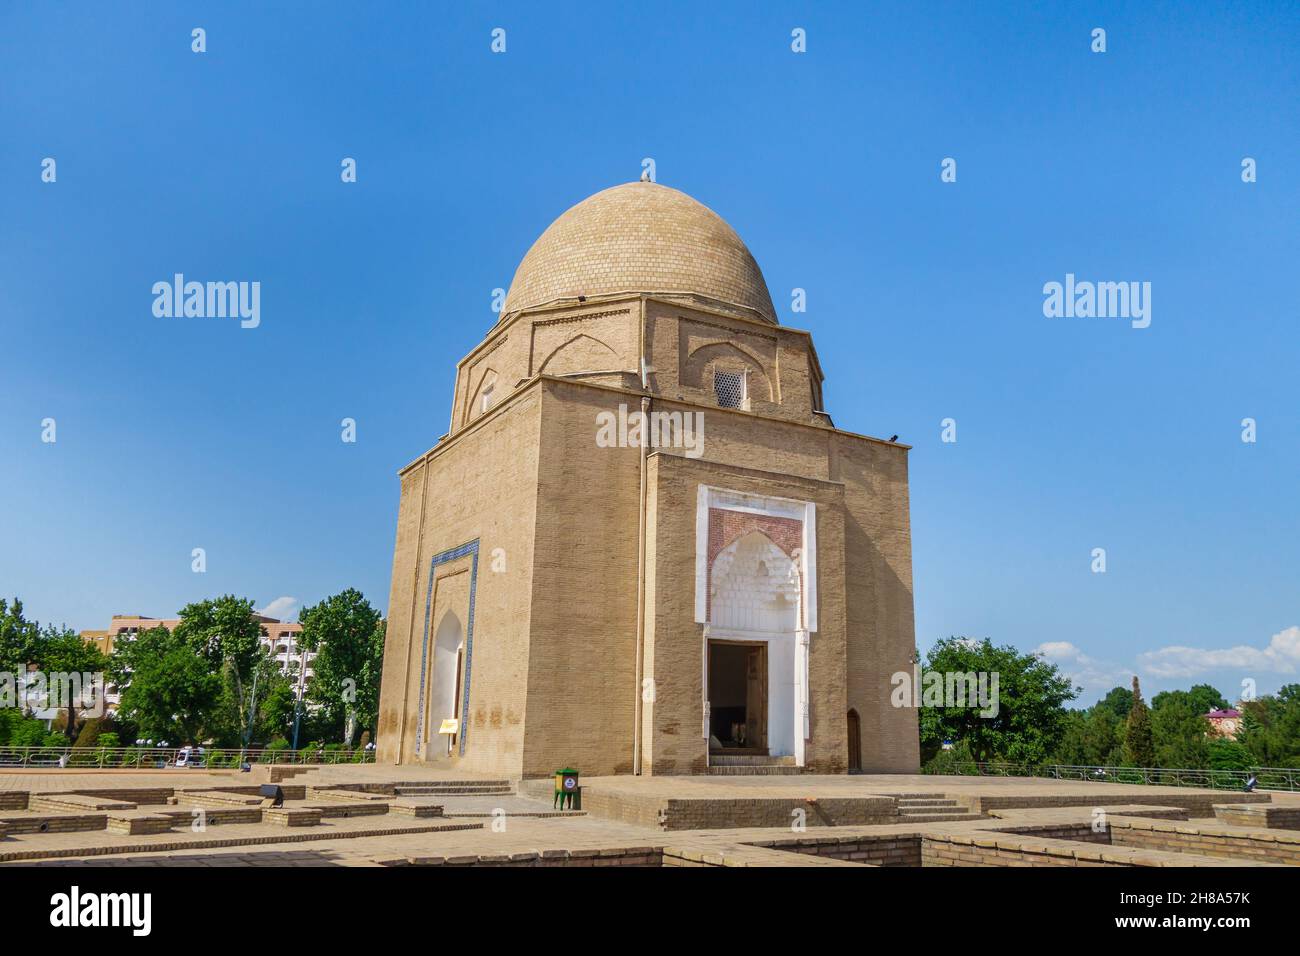 Panorama of Rukhabad mausoleum in Samarkand, Uzbekistan. Building was built in 1380. Foundations of ancient buildings are visible around. Writing on g Stock Photo